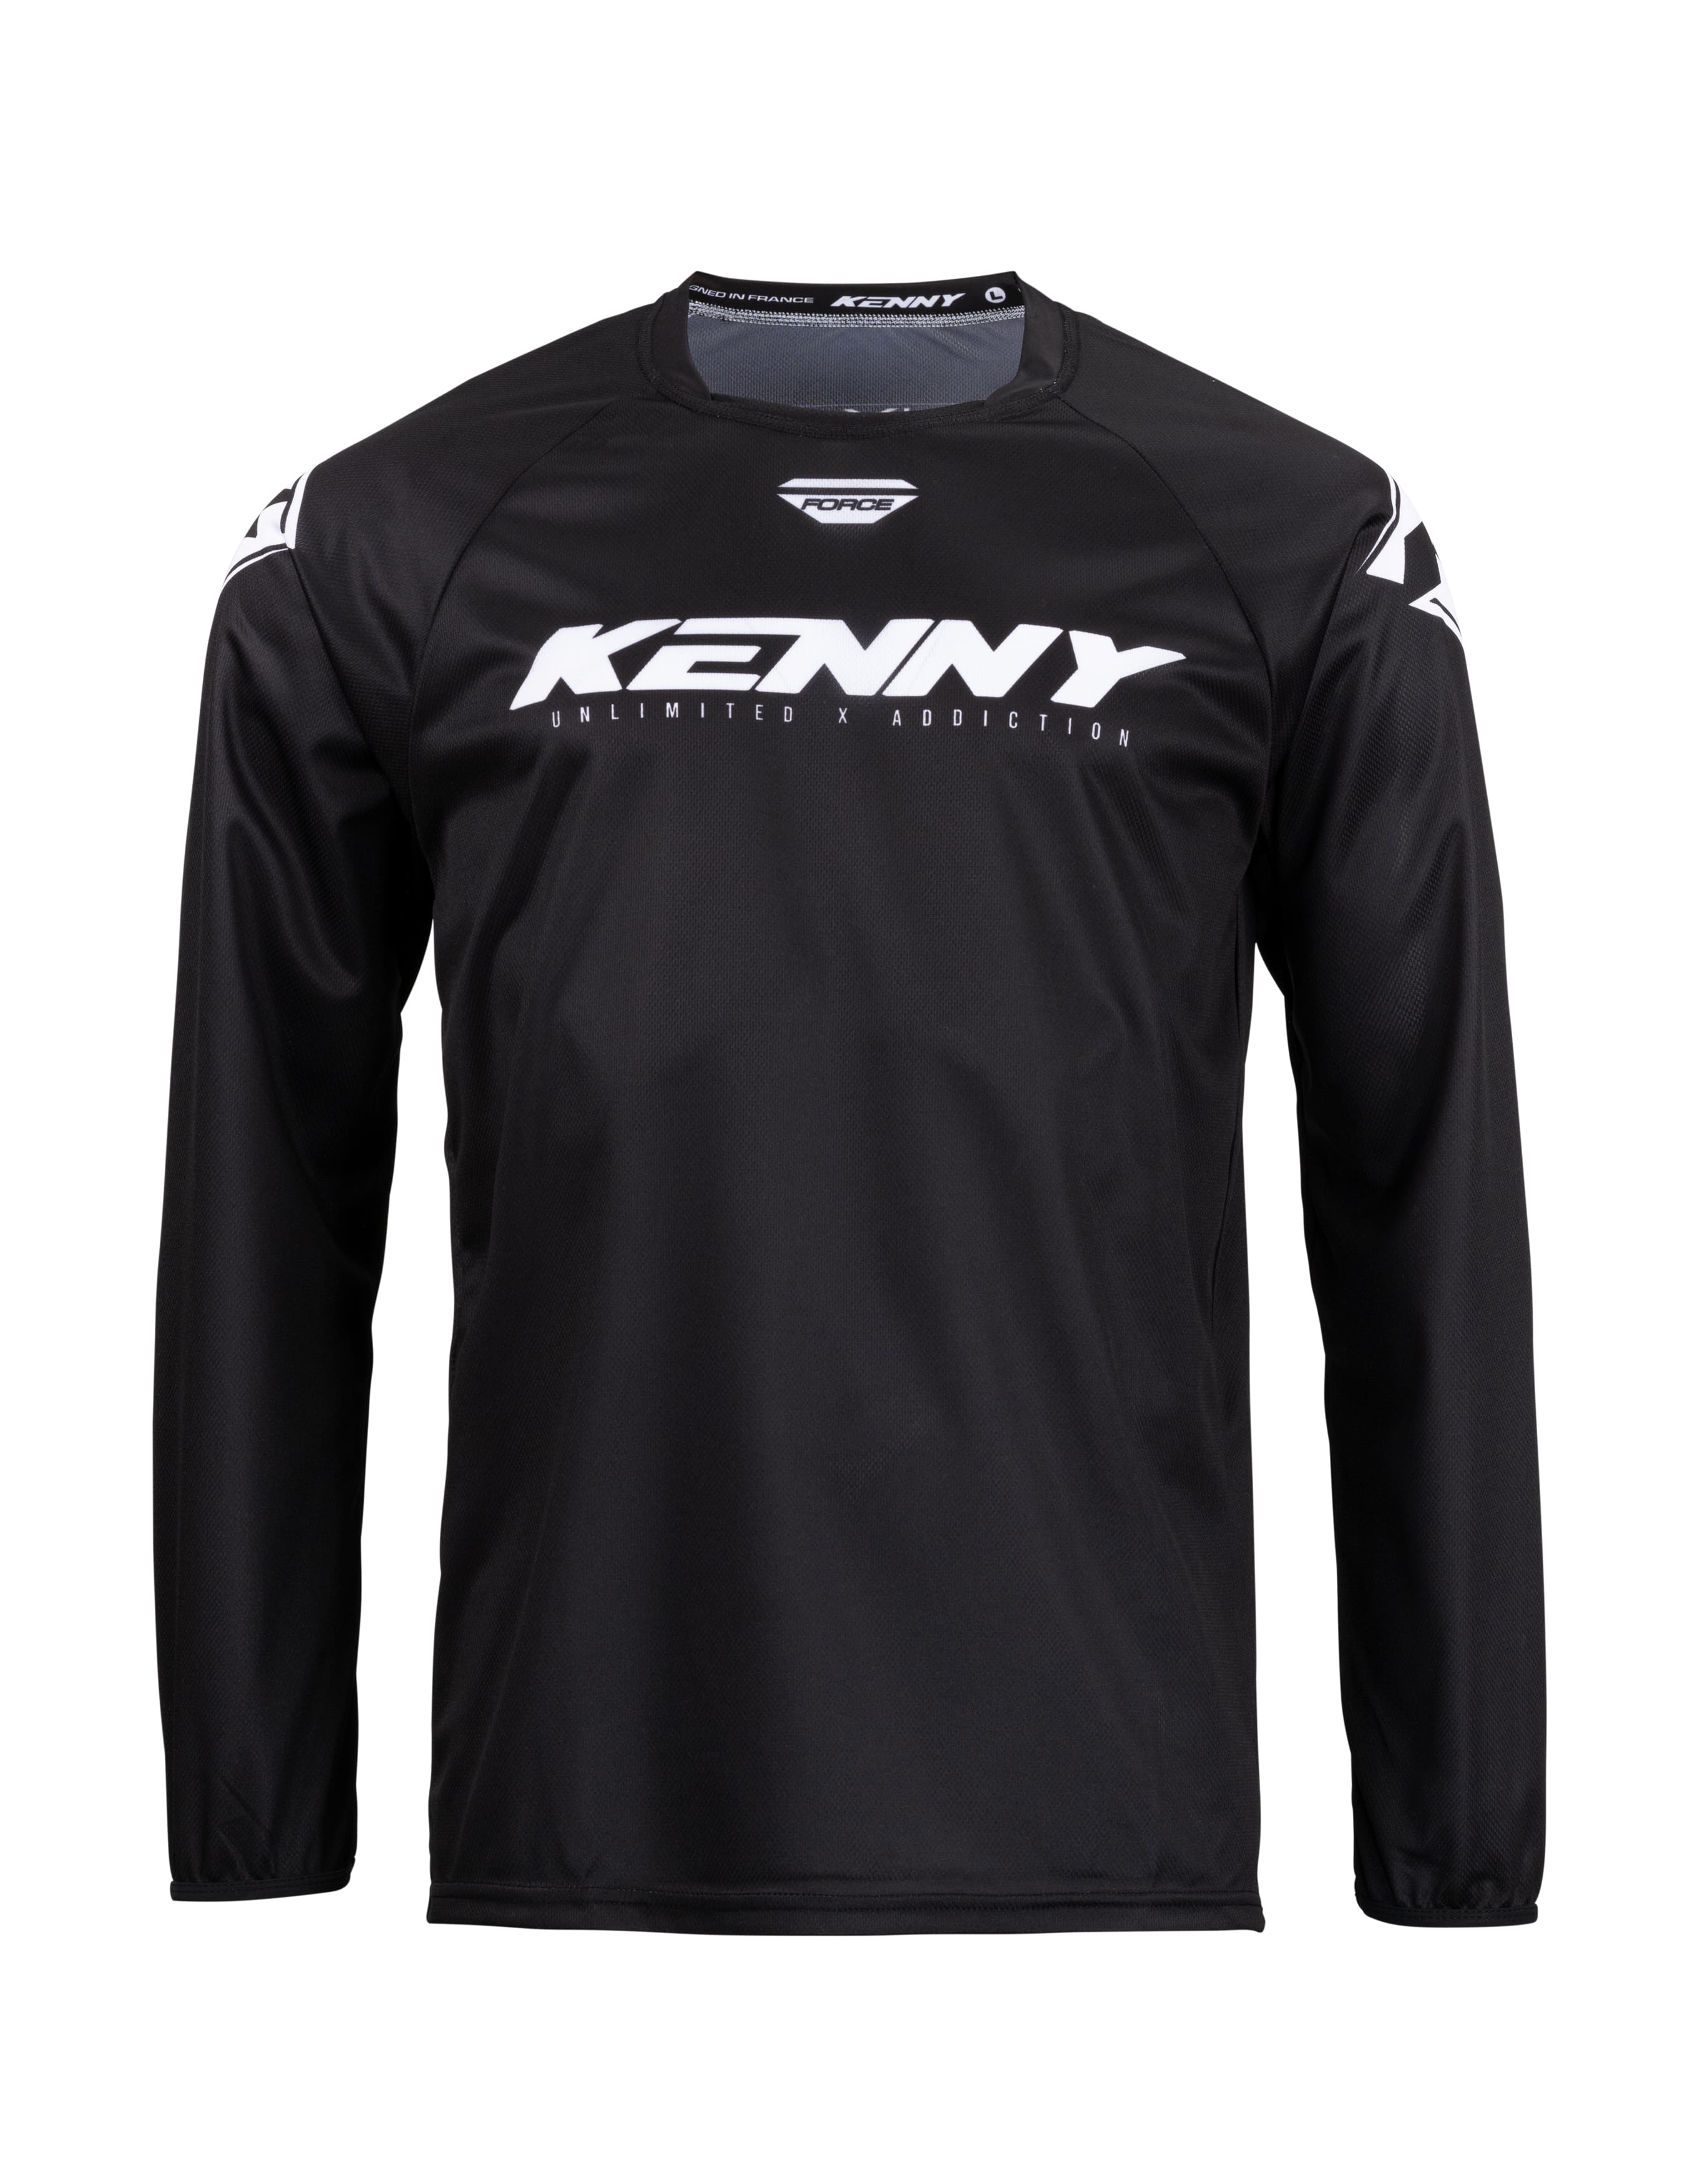 maillot_motocross_kenny_force_black